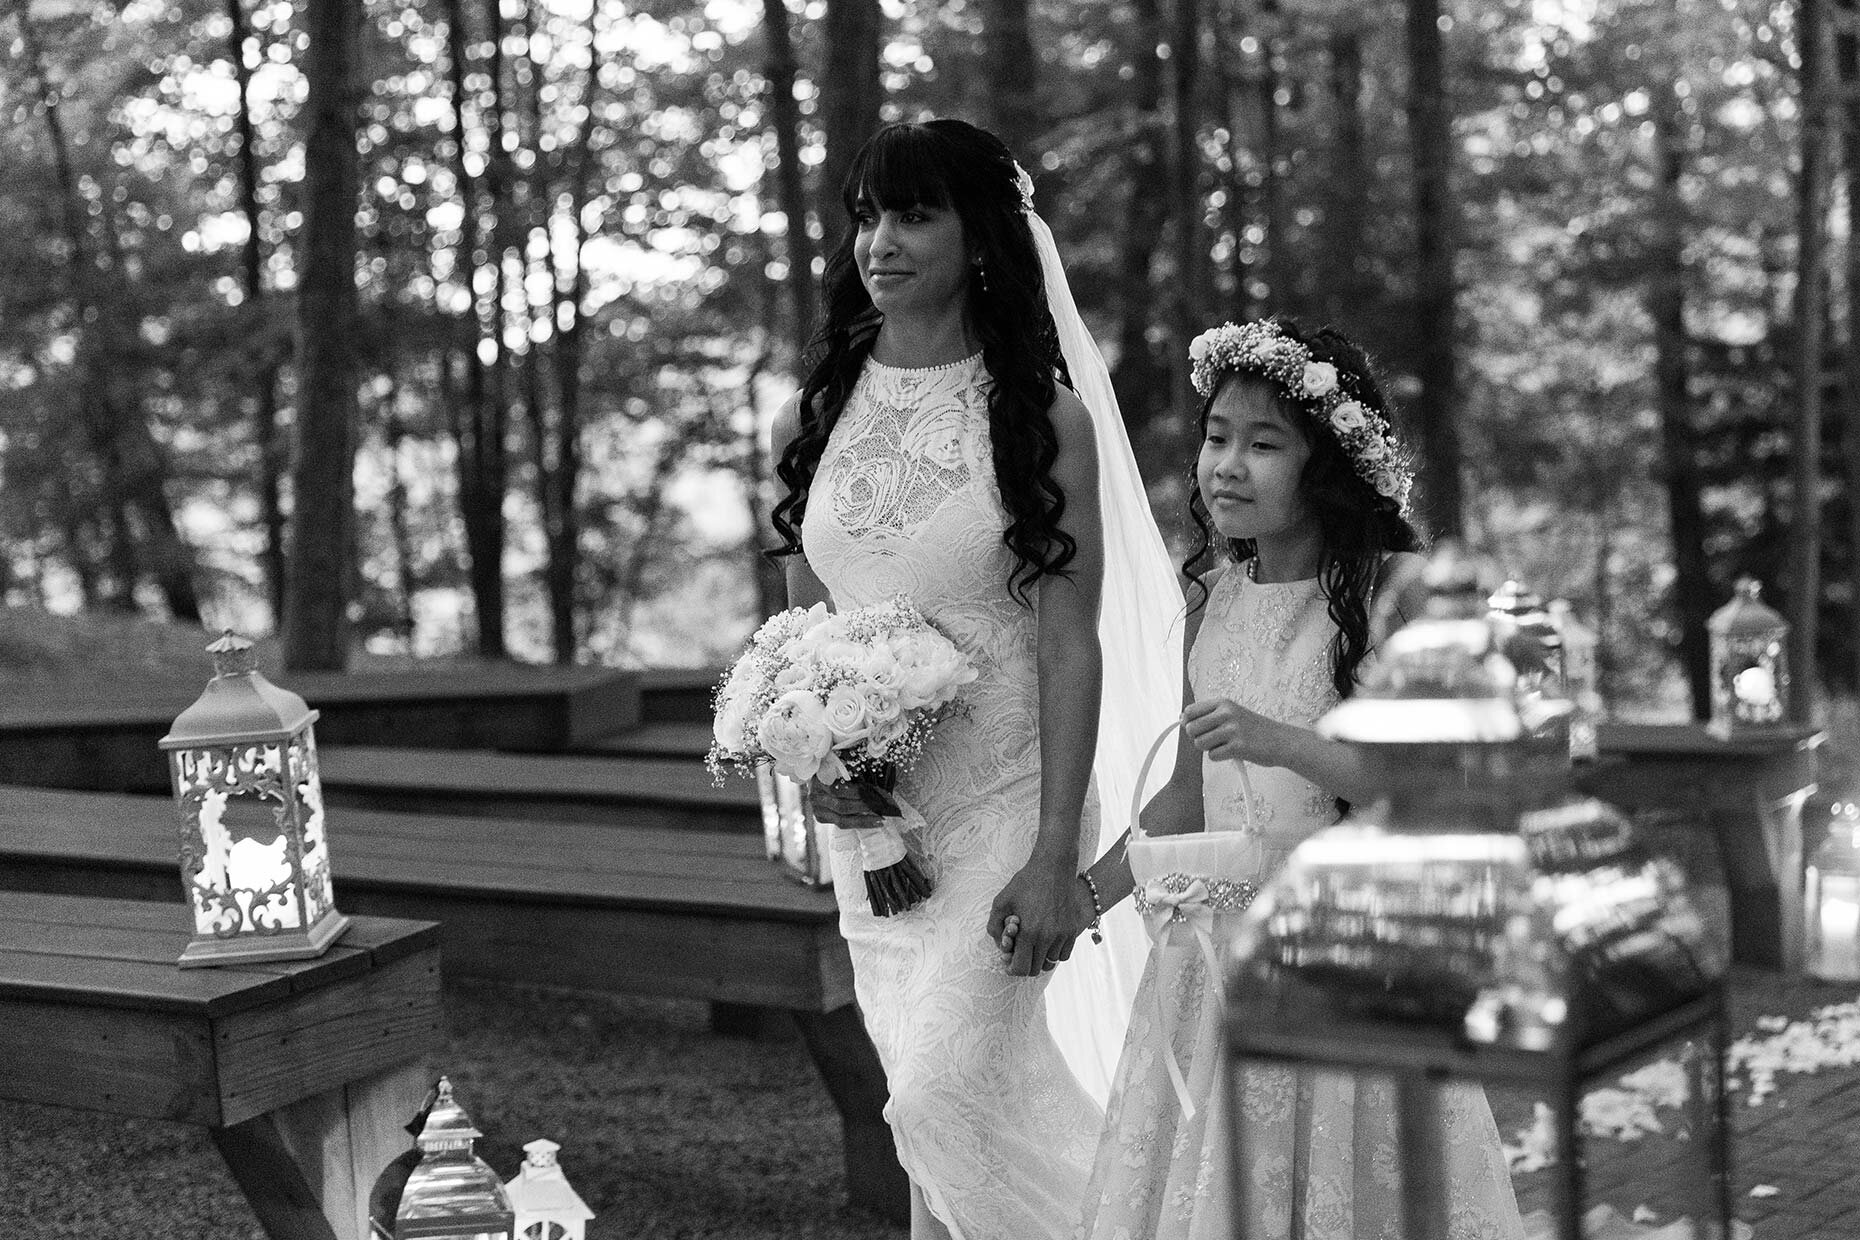 Flower girl and bride walking hand in hand